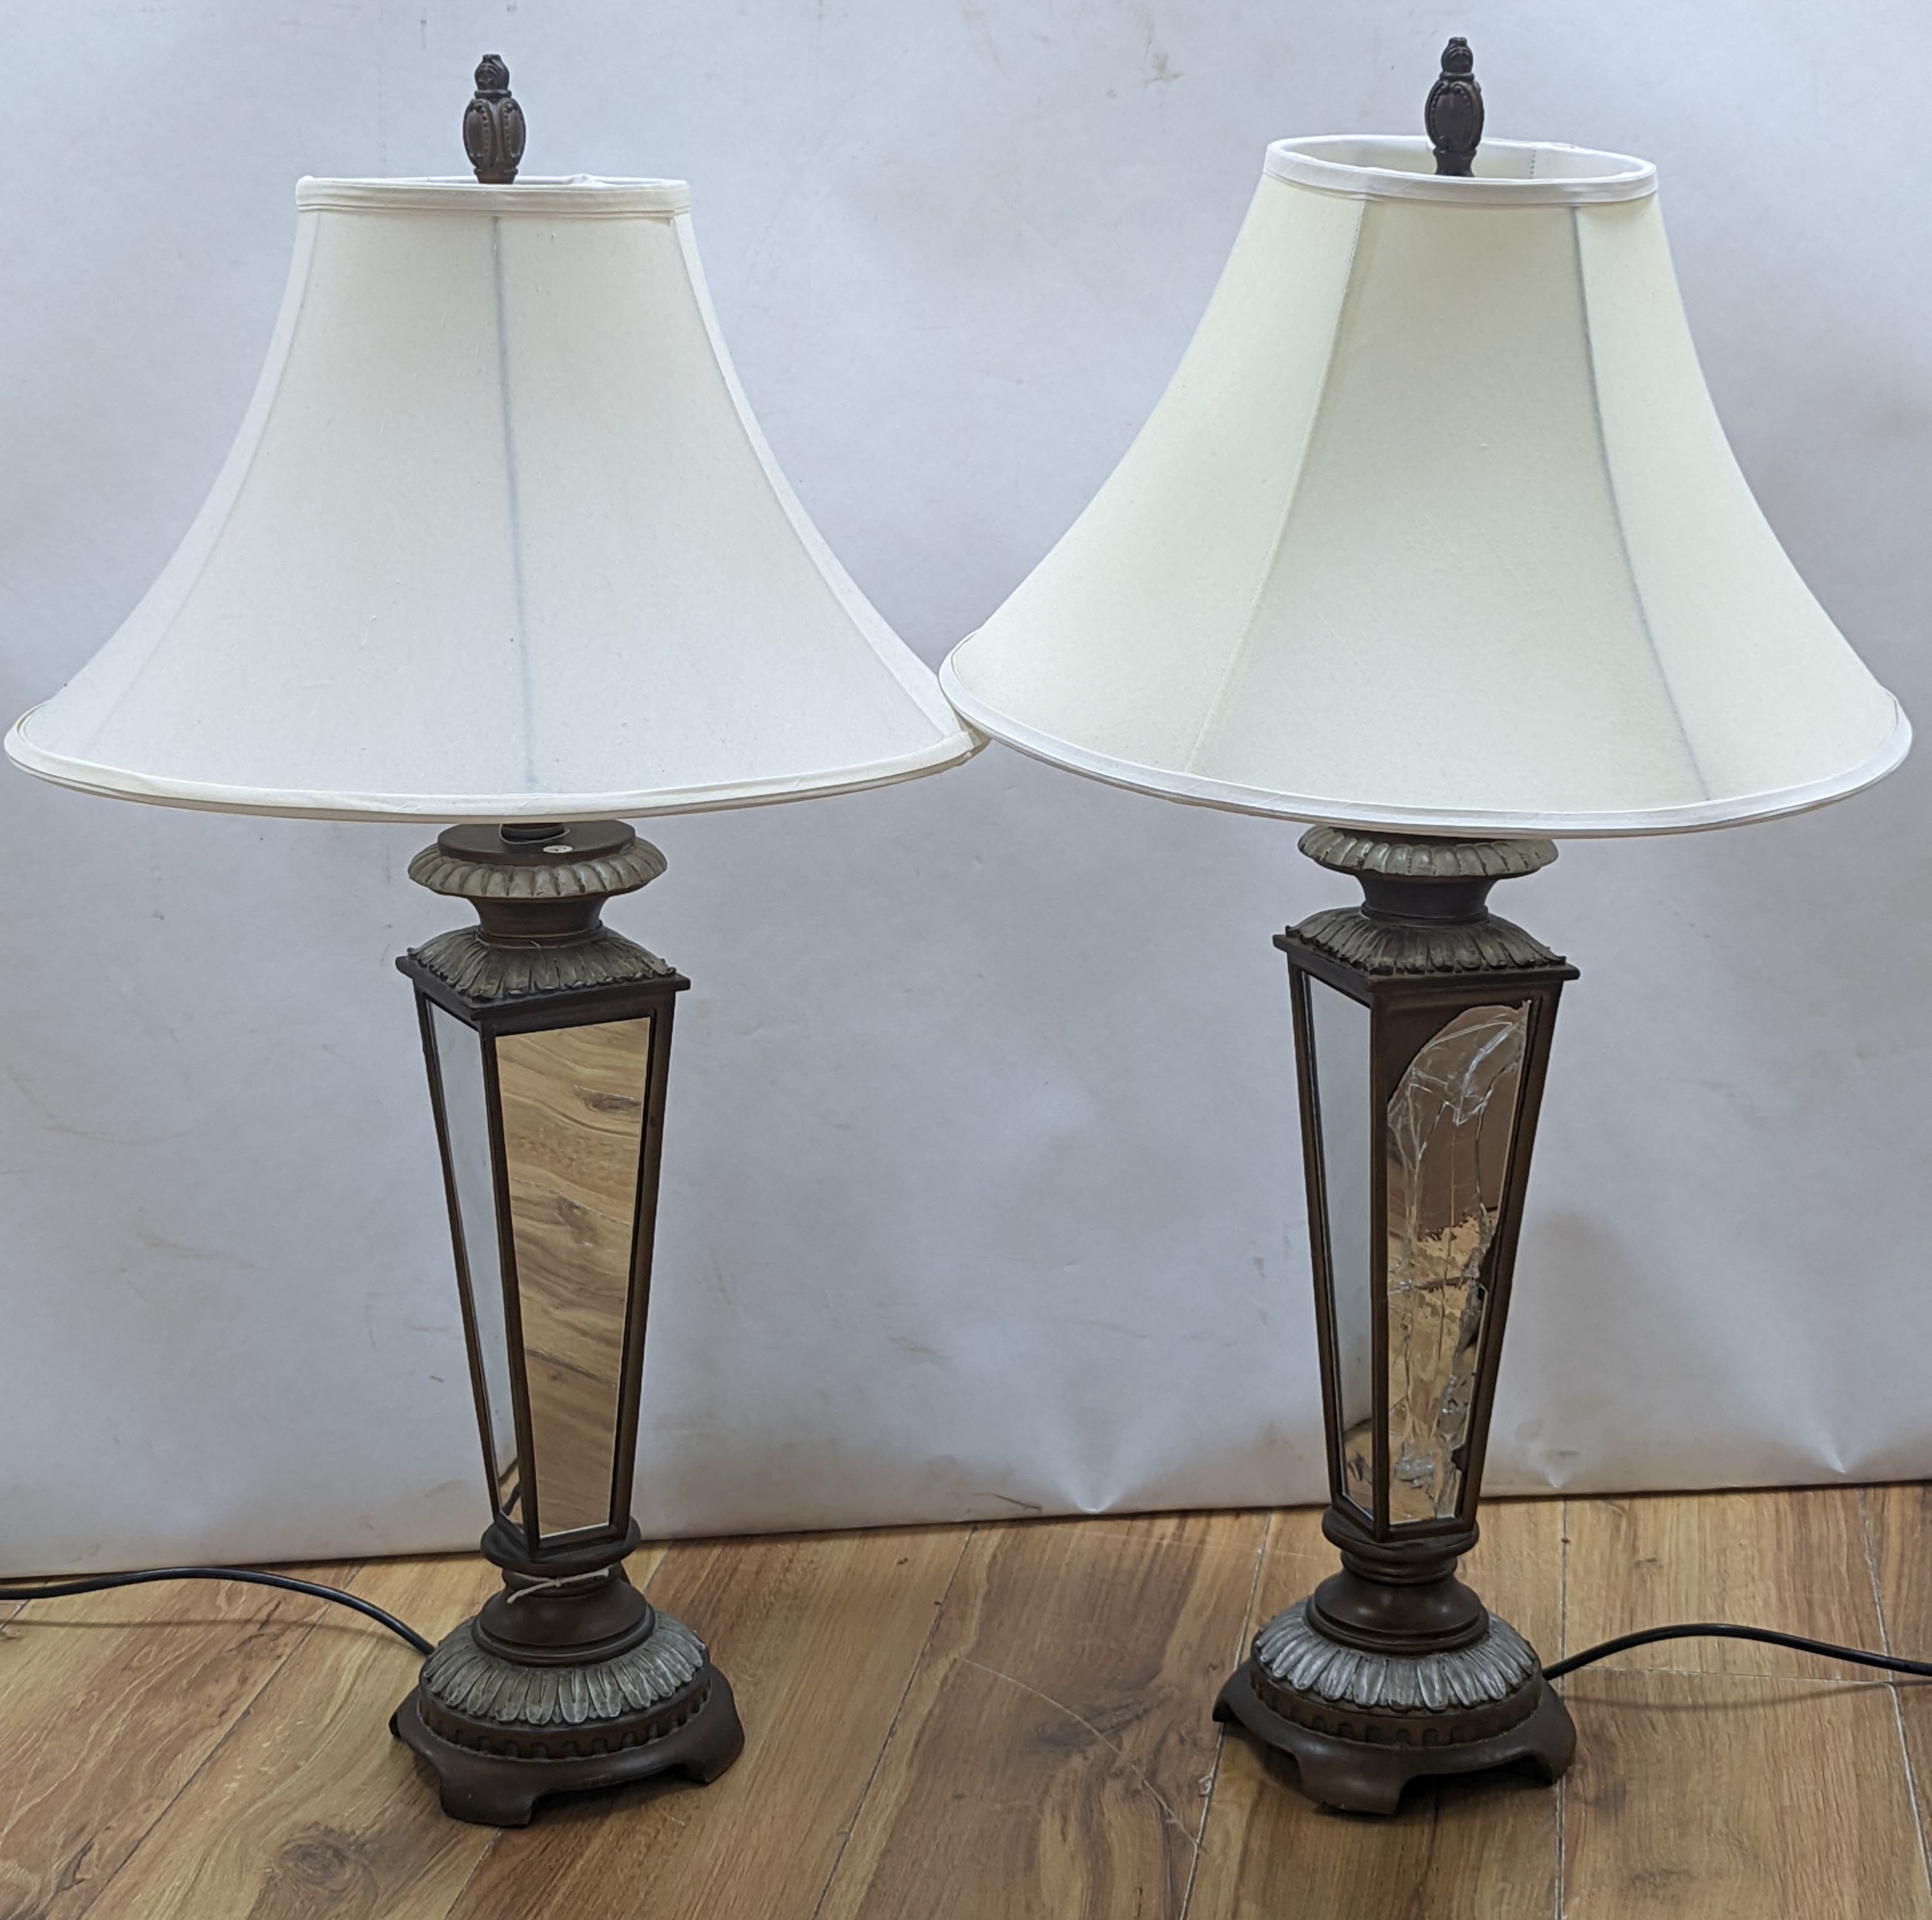 A pair of mirrored bedside lamps, one a/f with shades